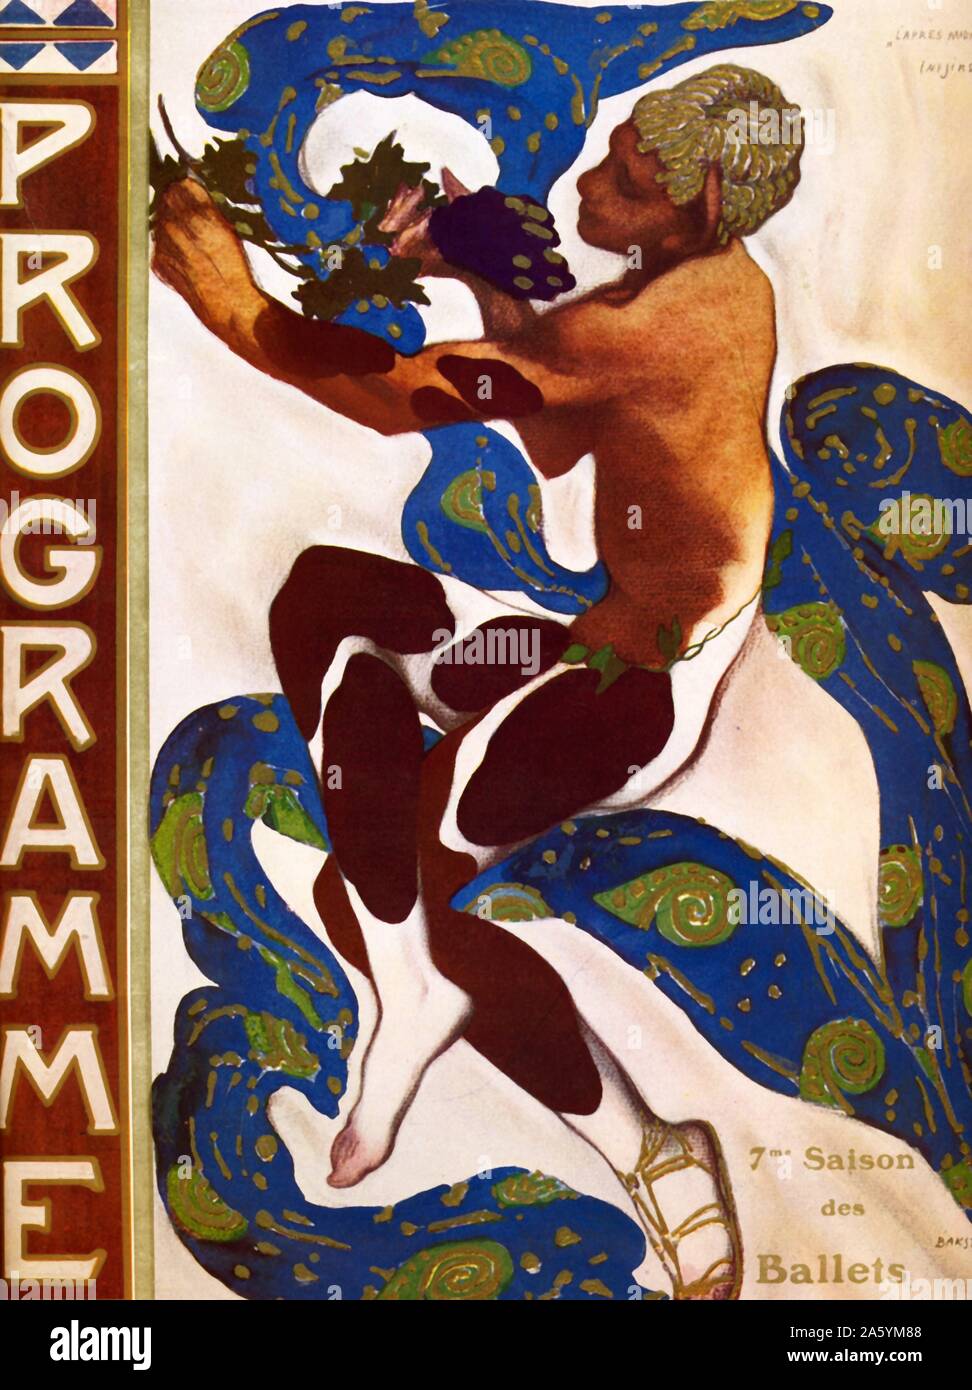 Leon Bakst, Vaslav Nijinsky (1890-1950), in the ballet Afternoon of a Faun 1912. Illustration from a programme for Prélude à l'après-midi d'un faune, by Claude Debussy, first performed in Paris on December 22, 1894 for the ballet. Designed by Léon Bakst Stock Photo